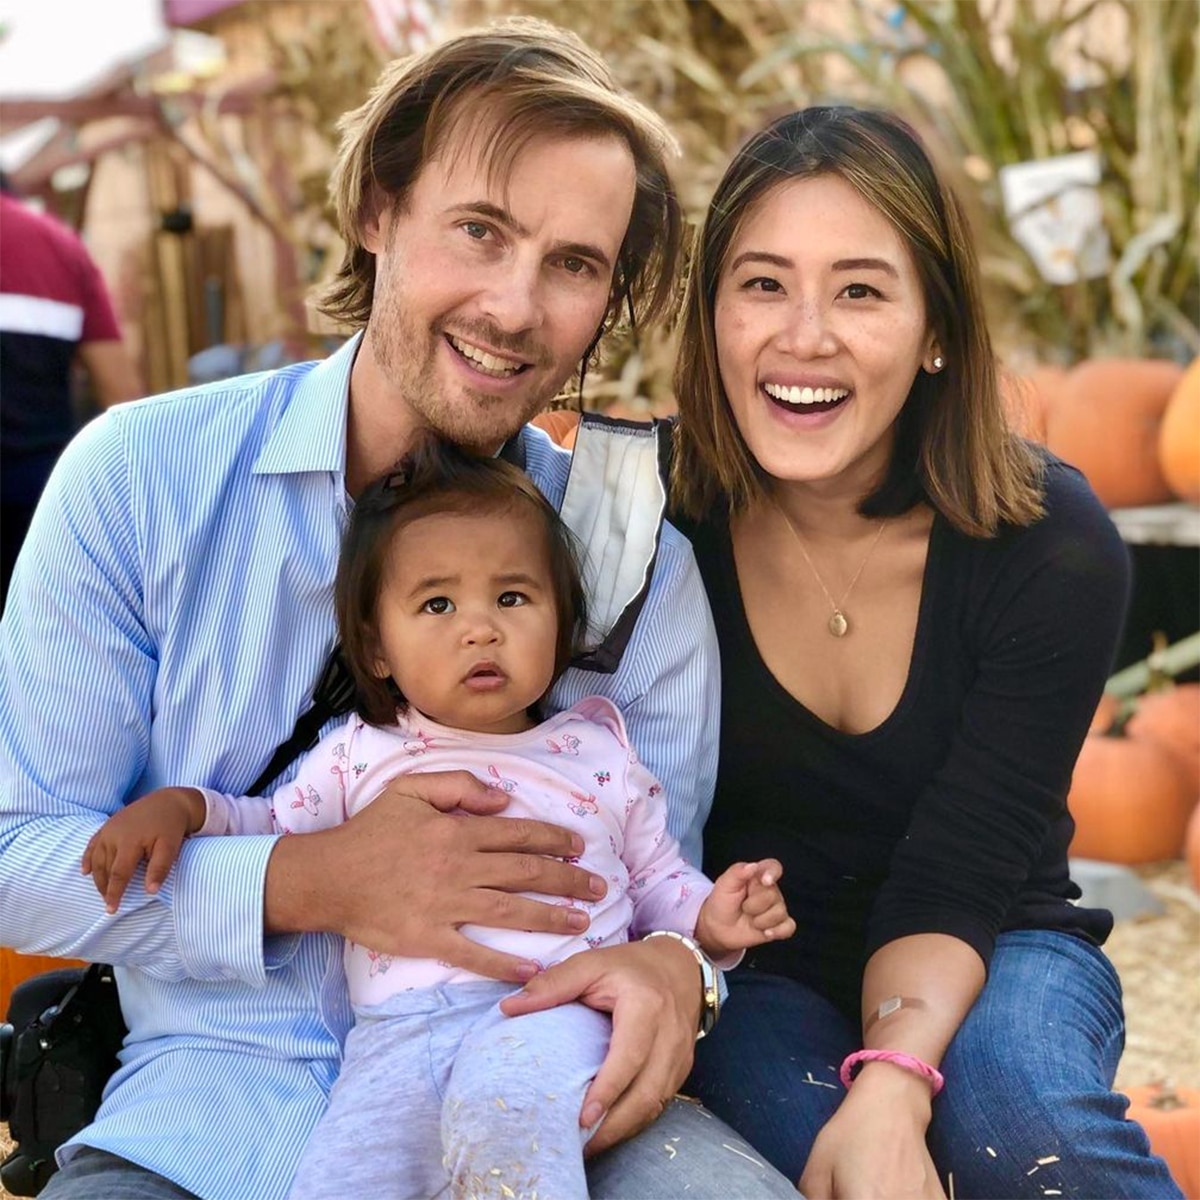 Erik von Detten, Your Childhood Crush, and Wife Expecting Baby No pic